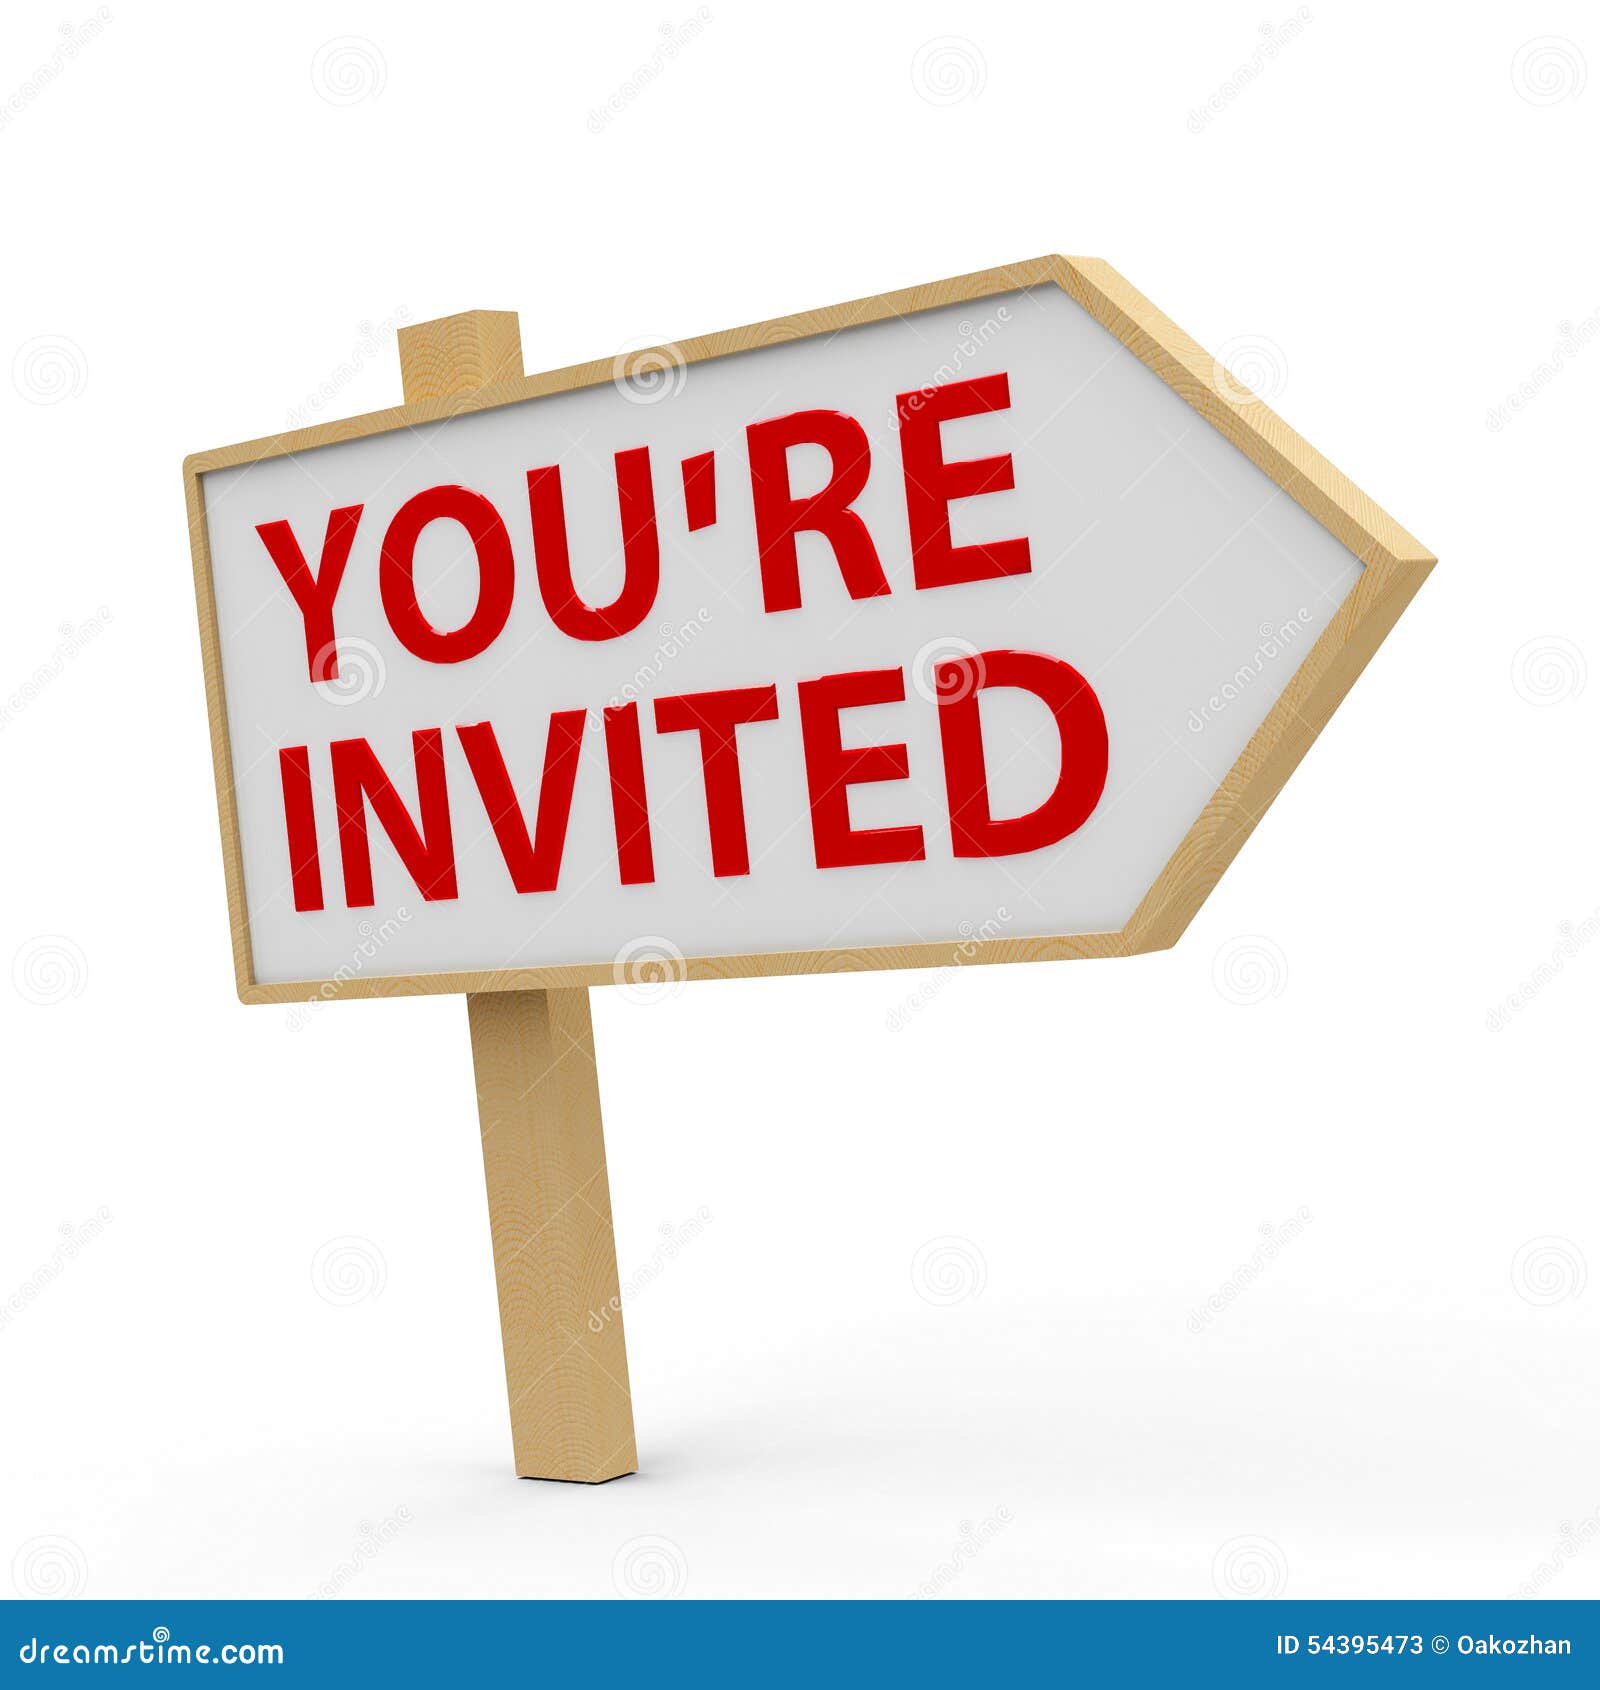 you are invited clipart - photo #4